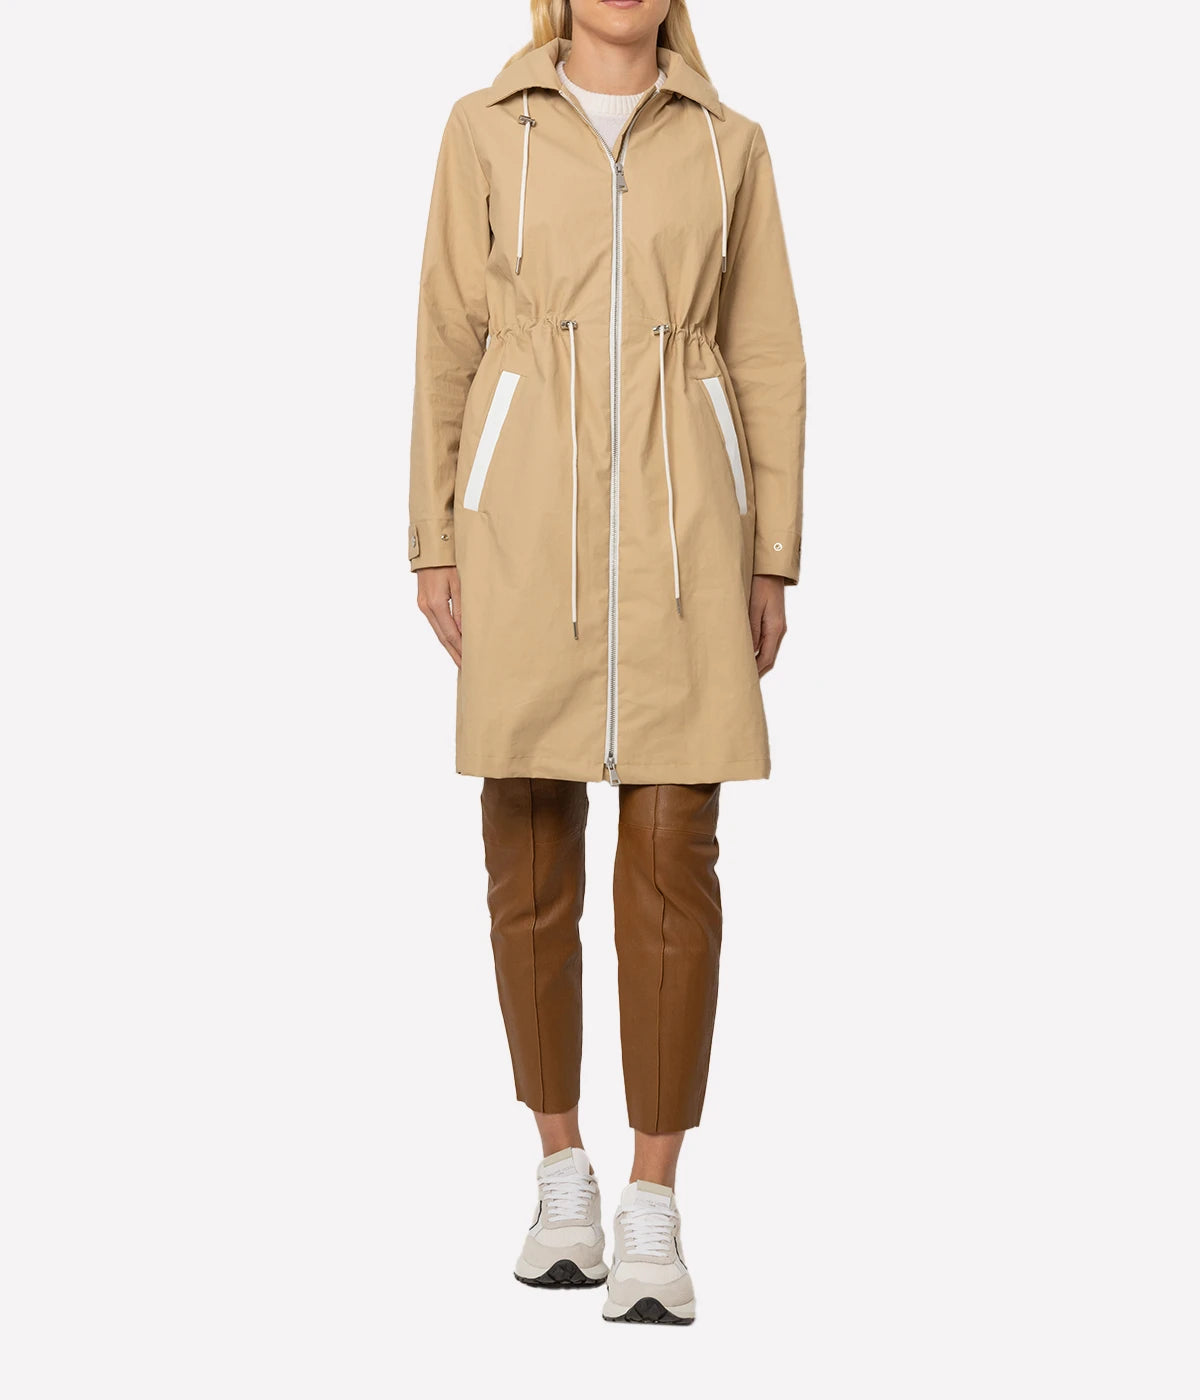 Trench Detachable Hood Jacket in Camel Ash